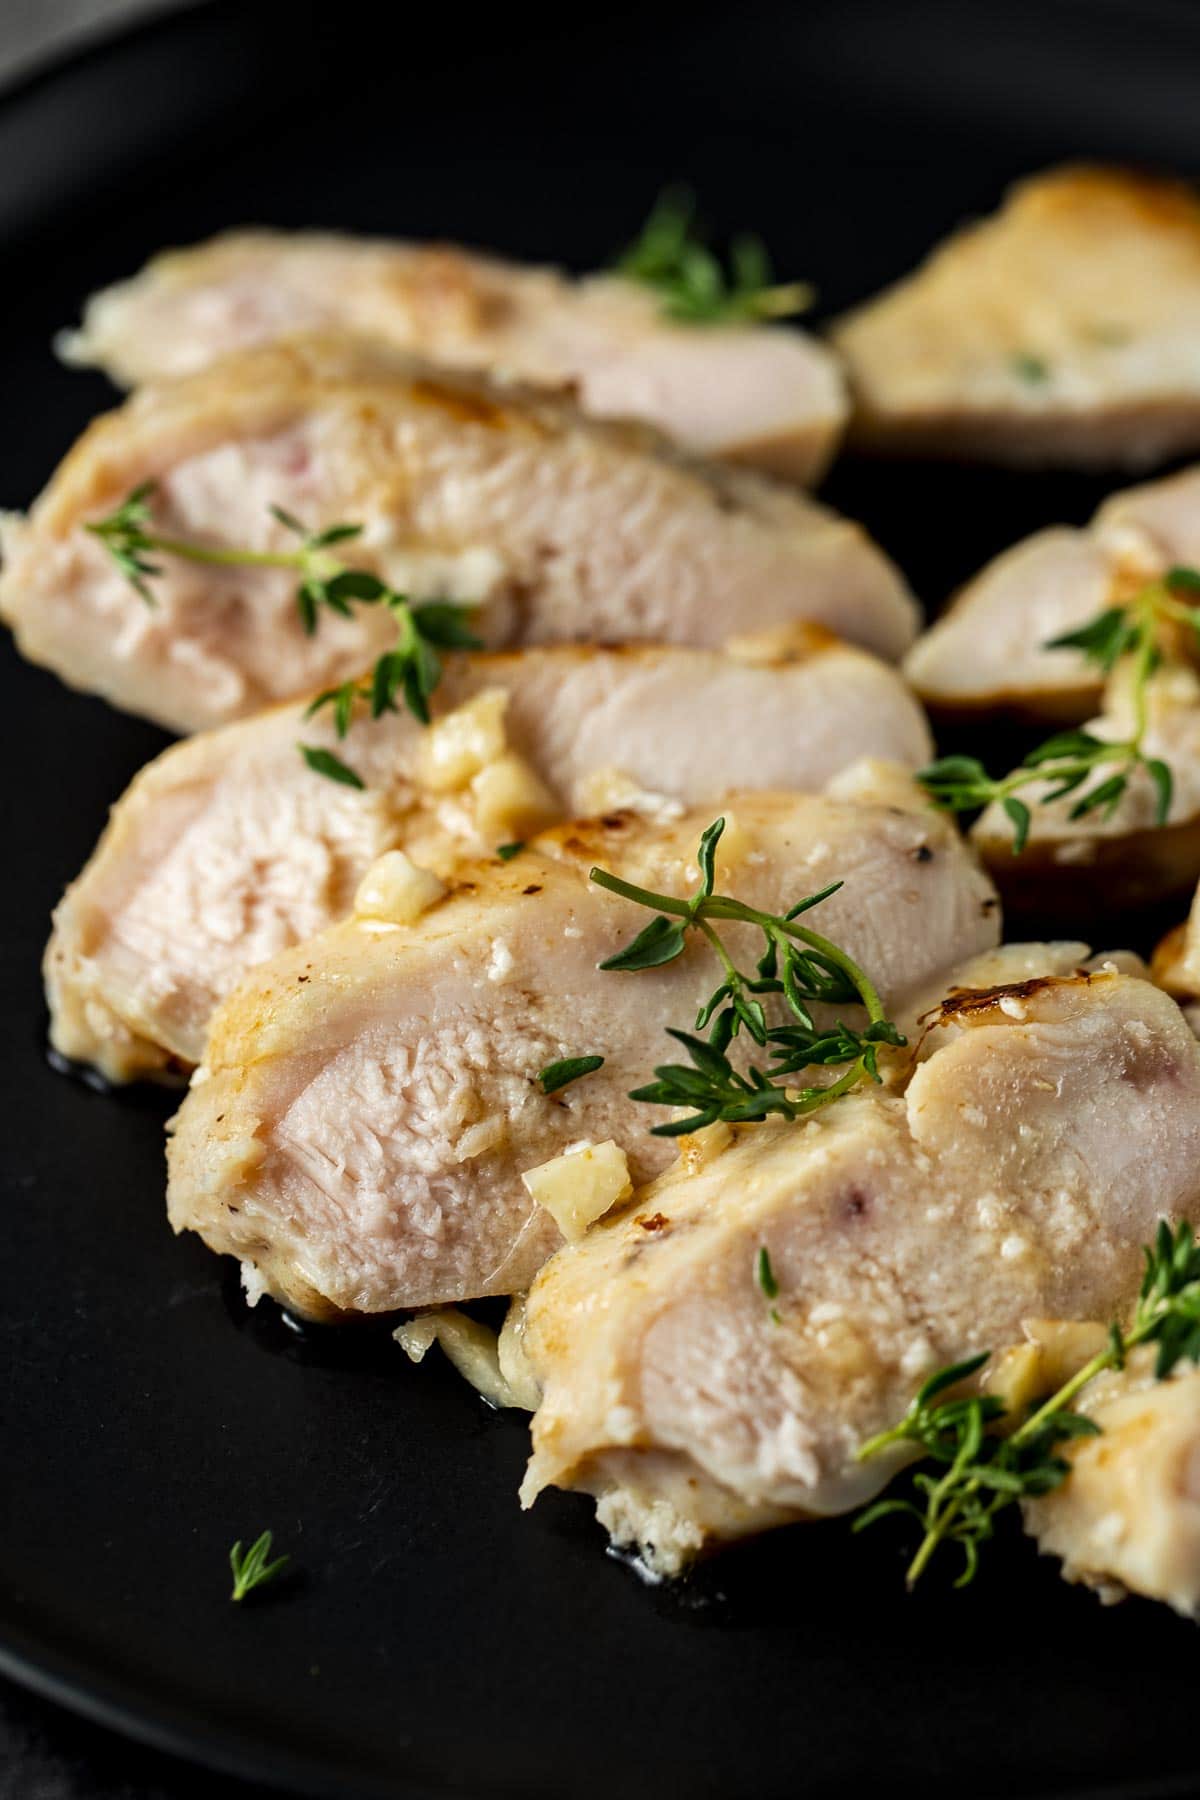 Instant Pot Ultra Chicken Breast~Sous Vide 